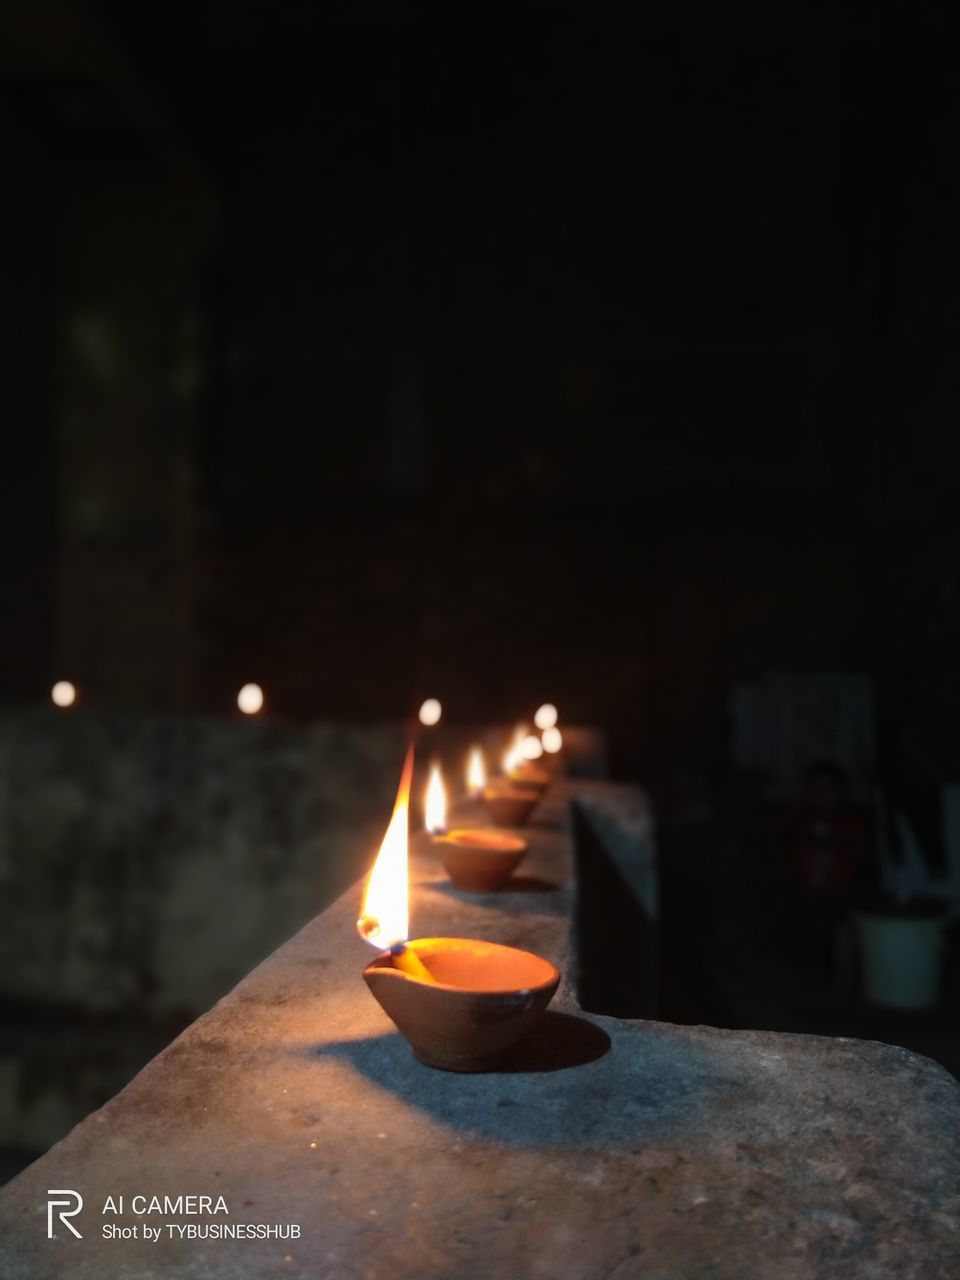 CLOSE-UP OF LIT CANDLE IN THE DARK